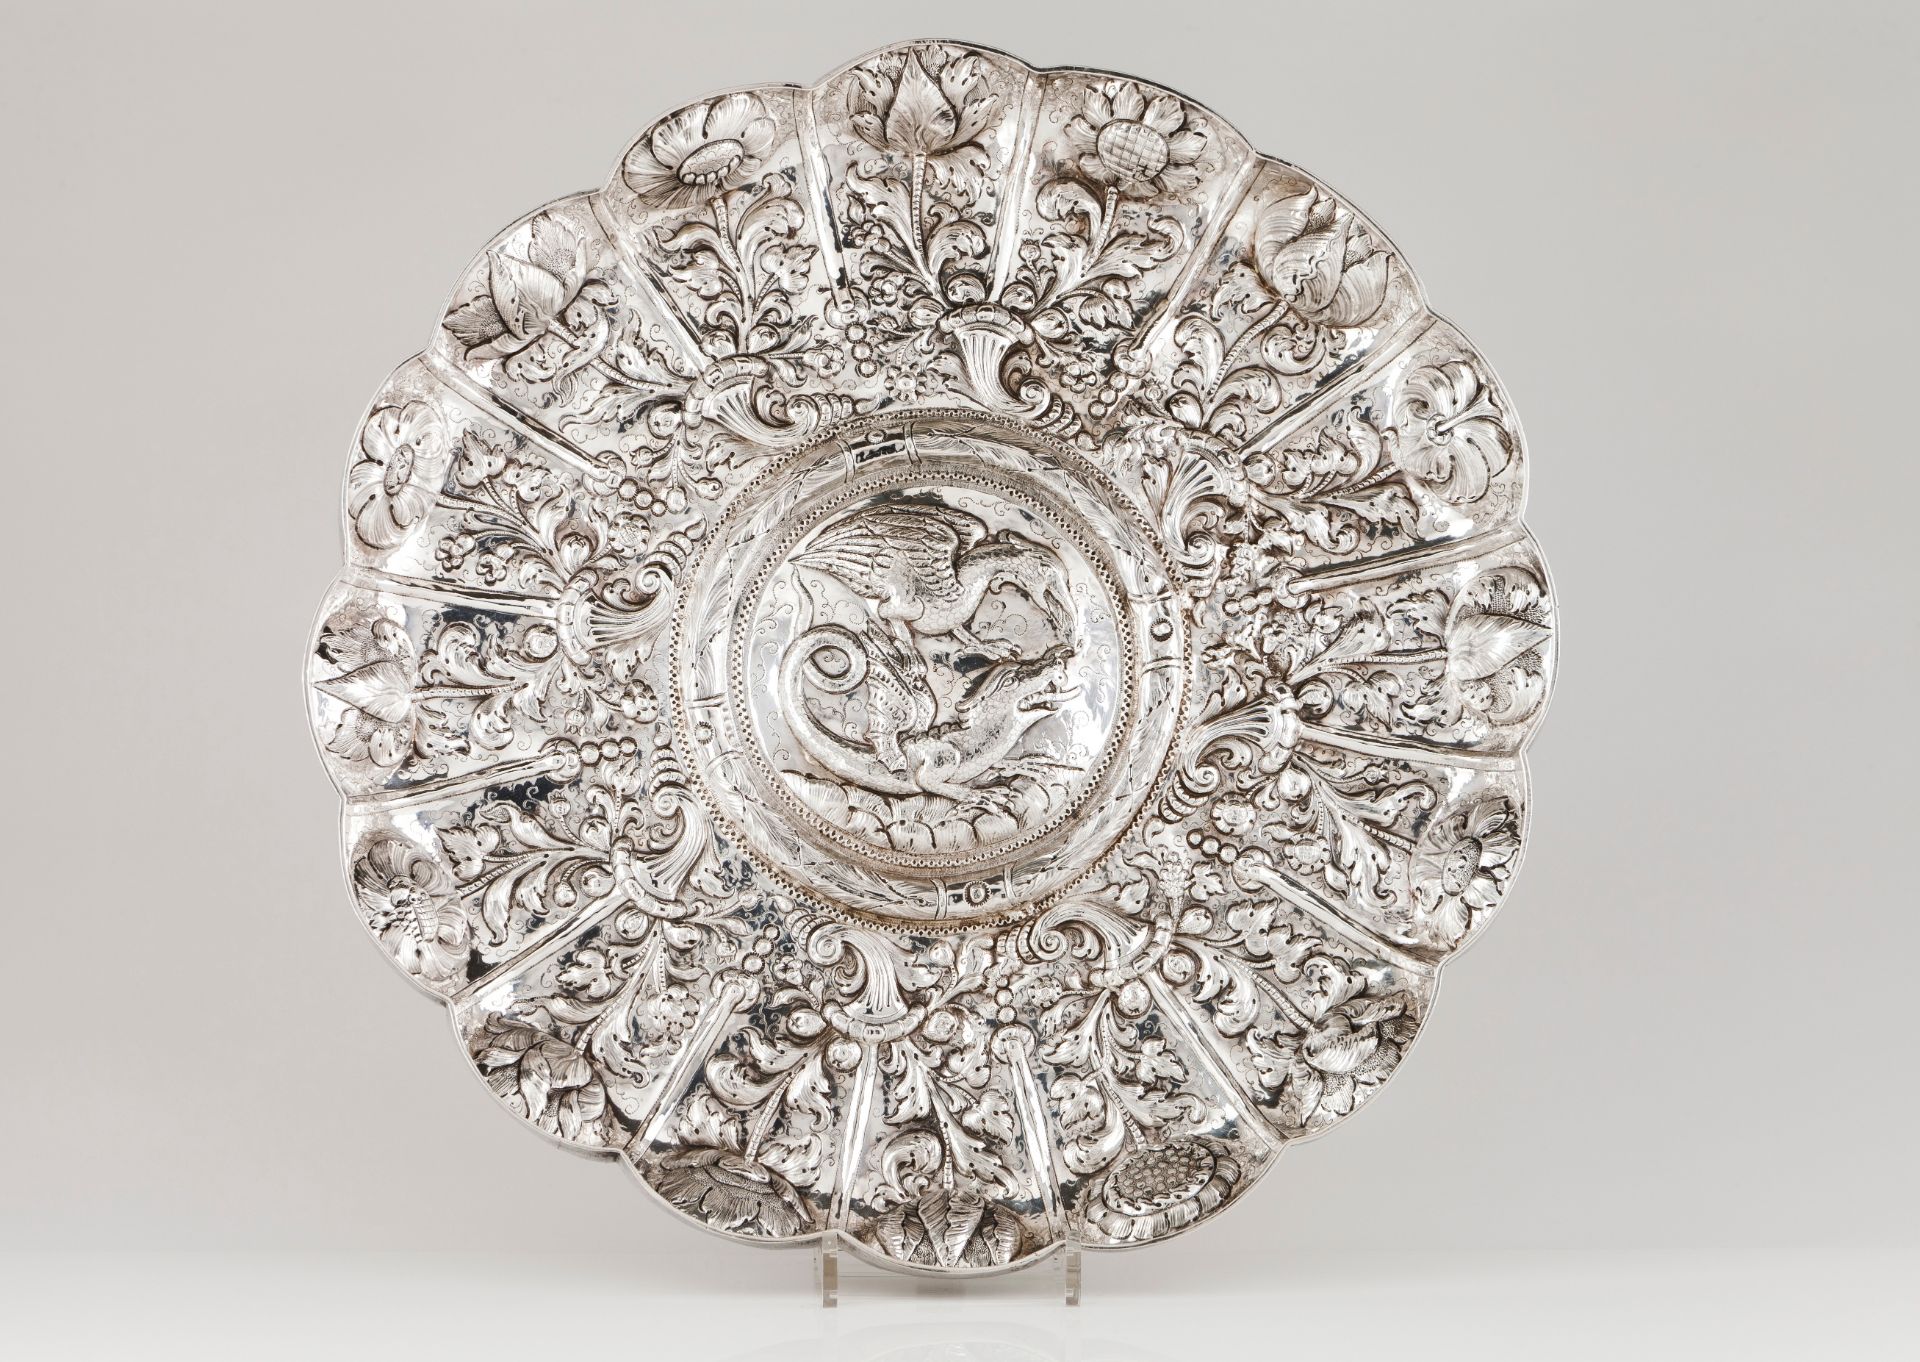 A large display salverSilver, 18th century Gadrooned of profuse repousse and chiselled foliage,